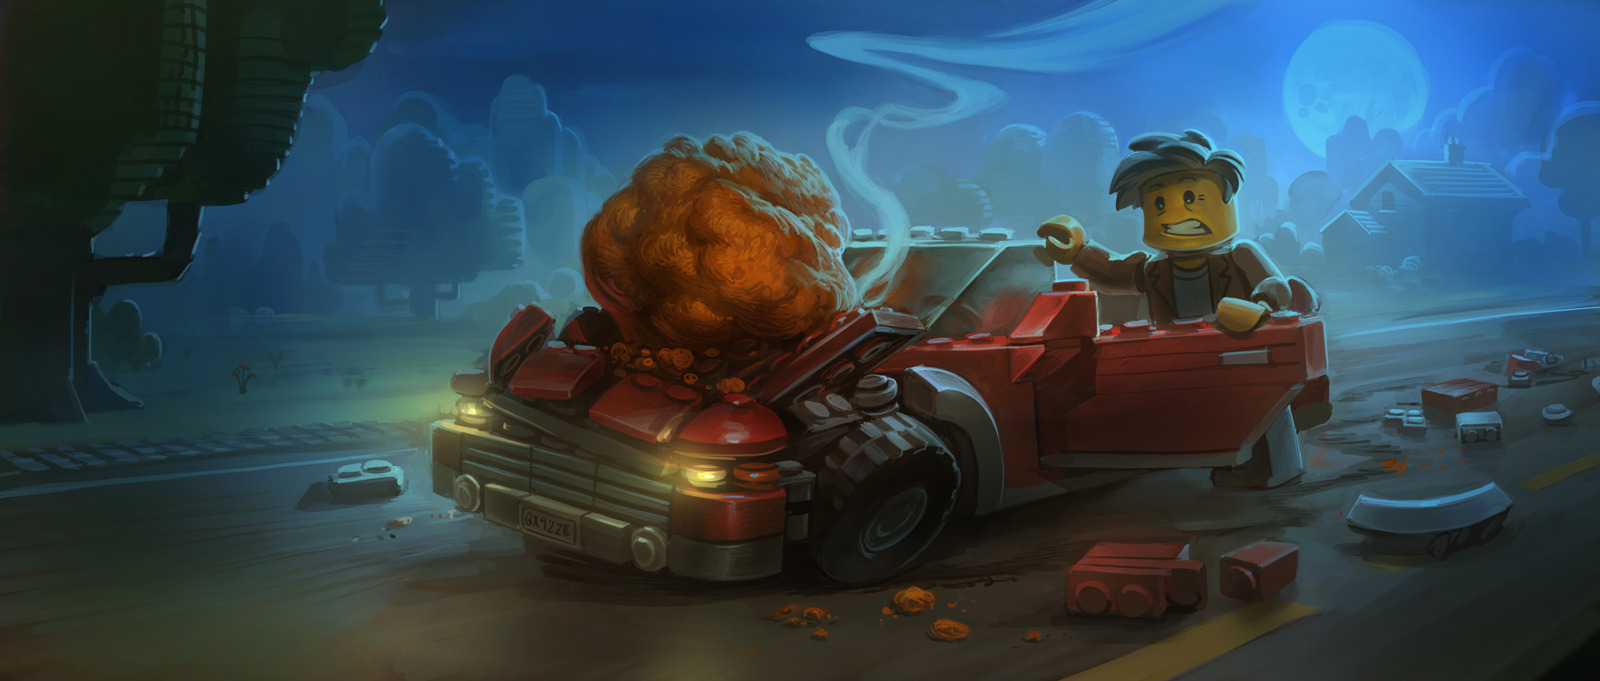 Concept art from an unproduced LEGO movie (feat.. OMG) | NeoGAF